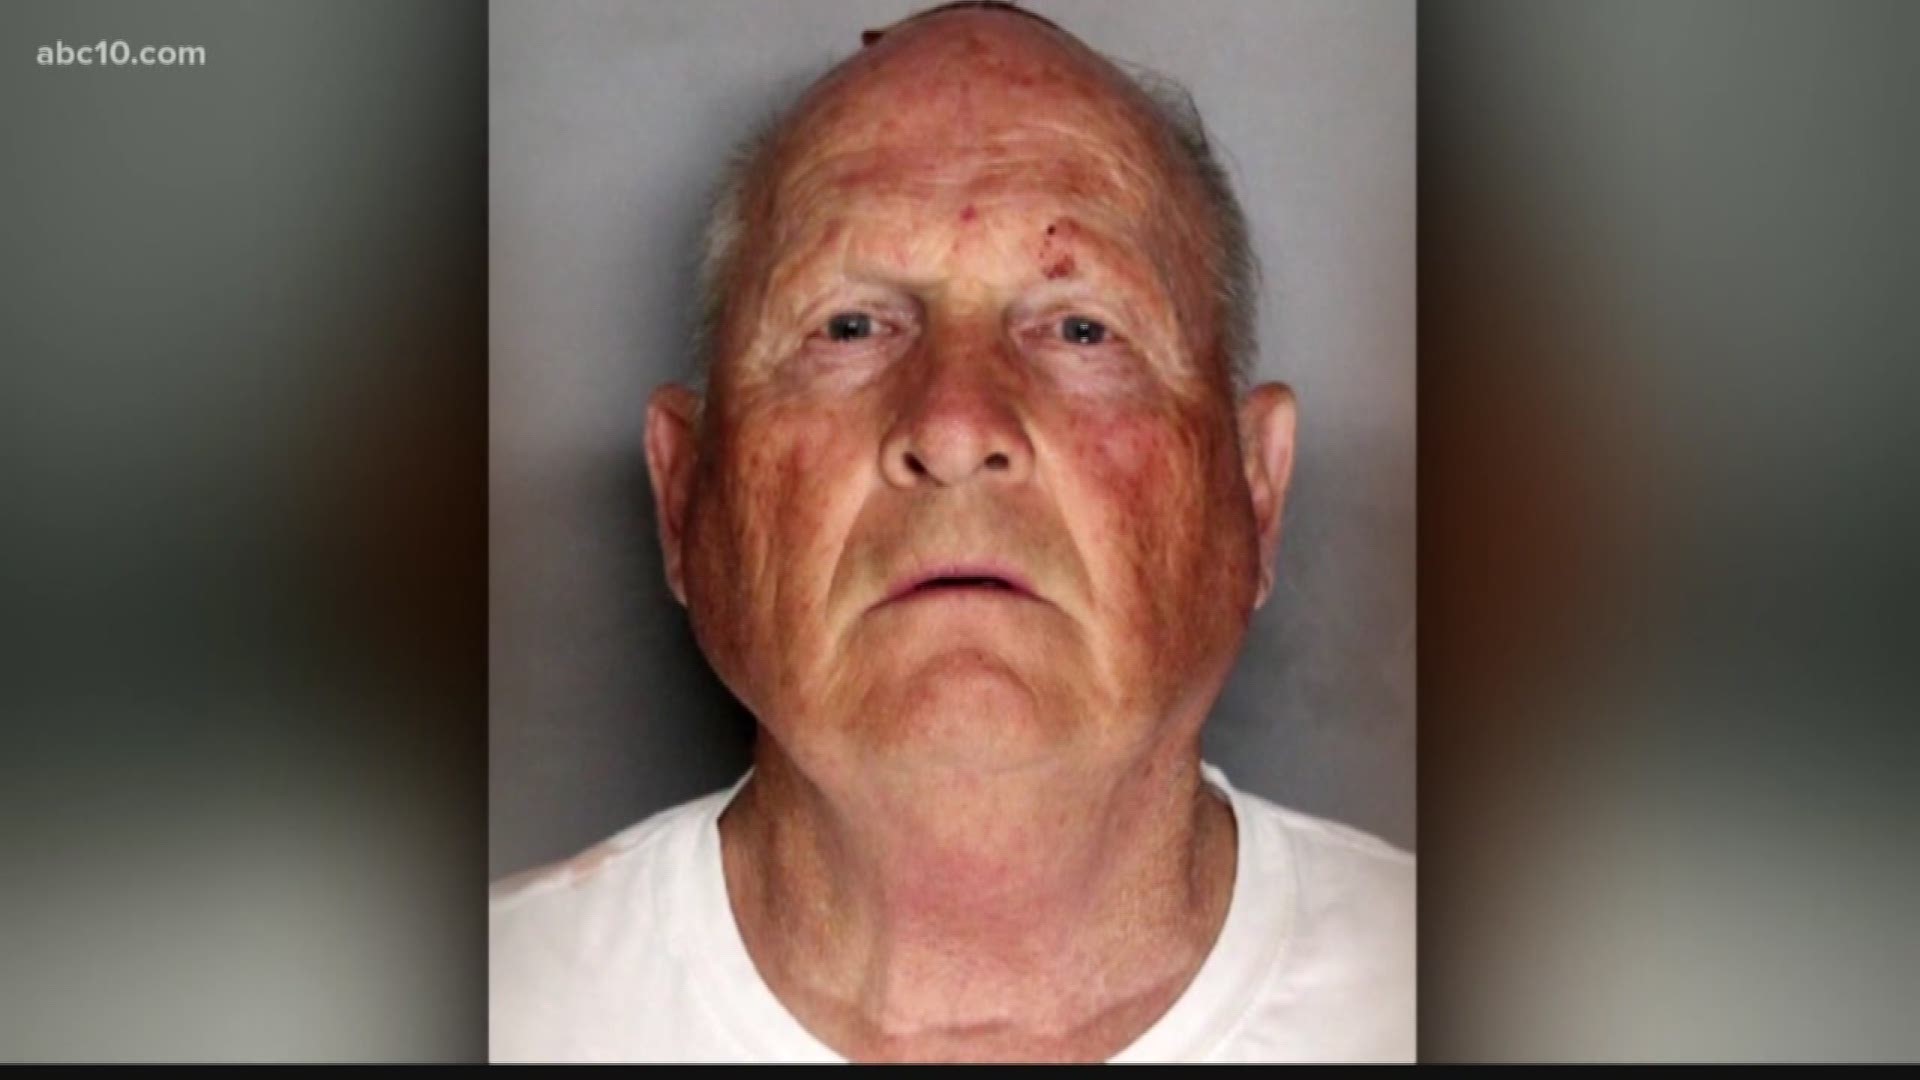 A man once sworn to protect the public from crime was accused Wednesday of living a double life terrorizing suburban neighborhoods at night, becoming one of California's most feared serial killers and rapists in the 1970s and '80s before leaving a cold tr